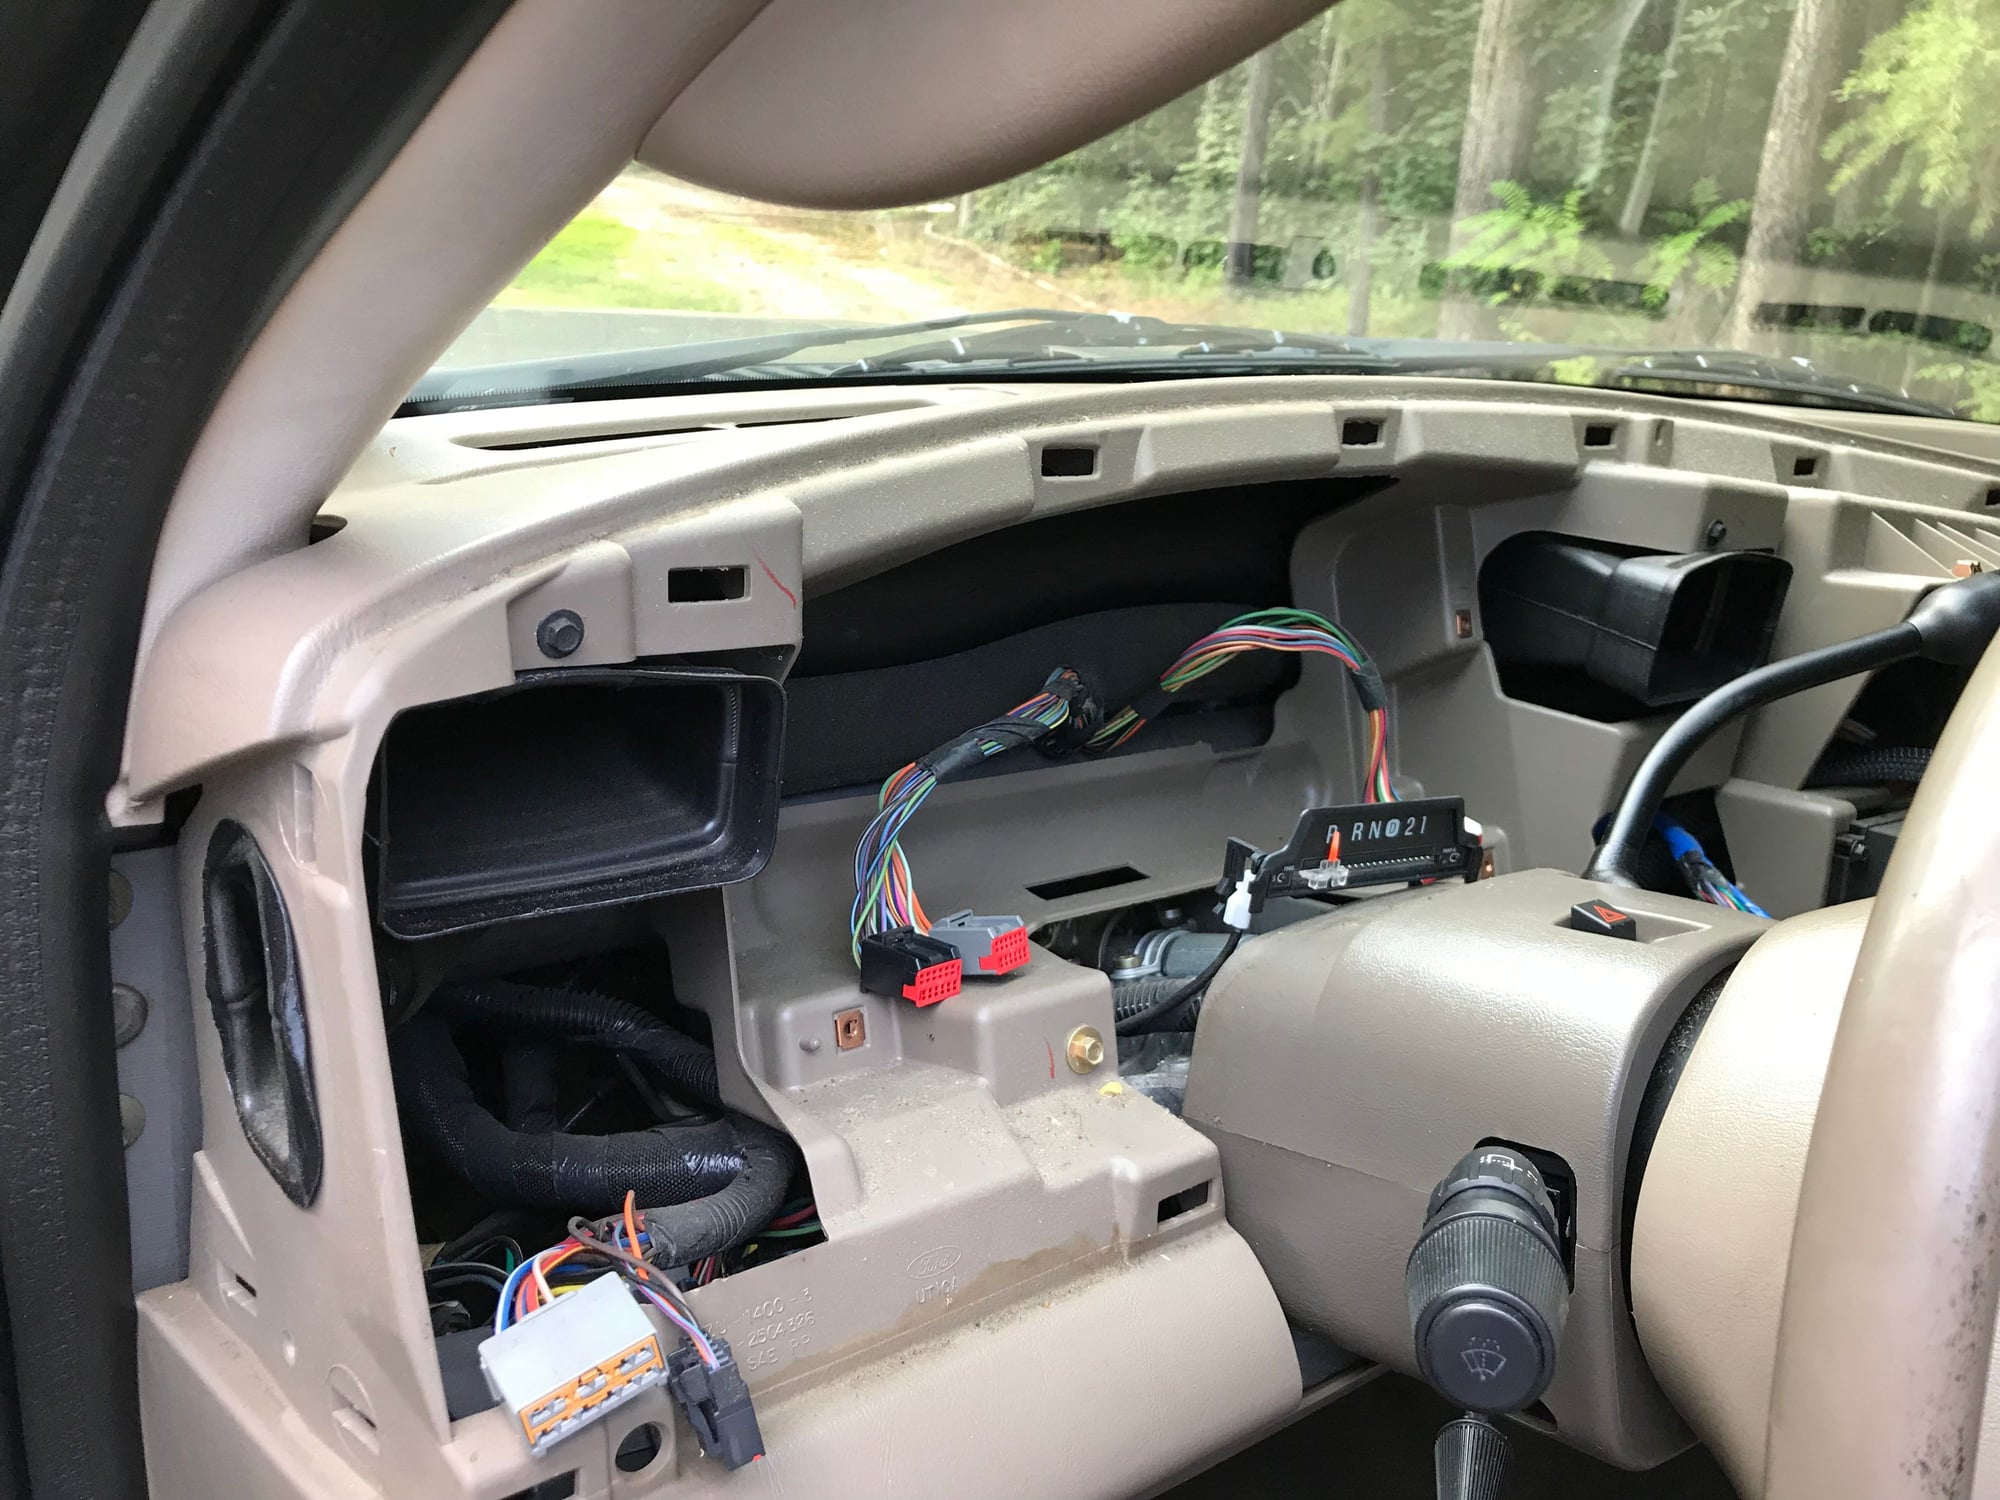 2004 Excursion Interior Lighting Issues Fixed Ford Truck